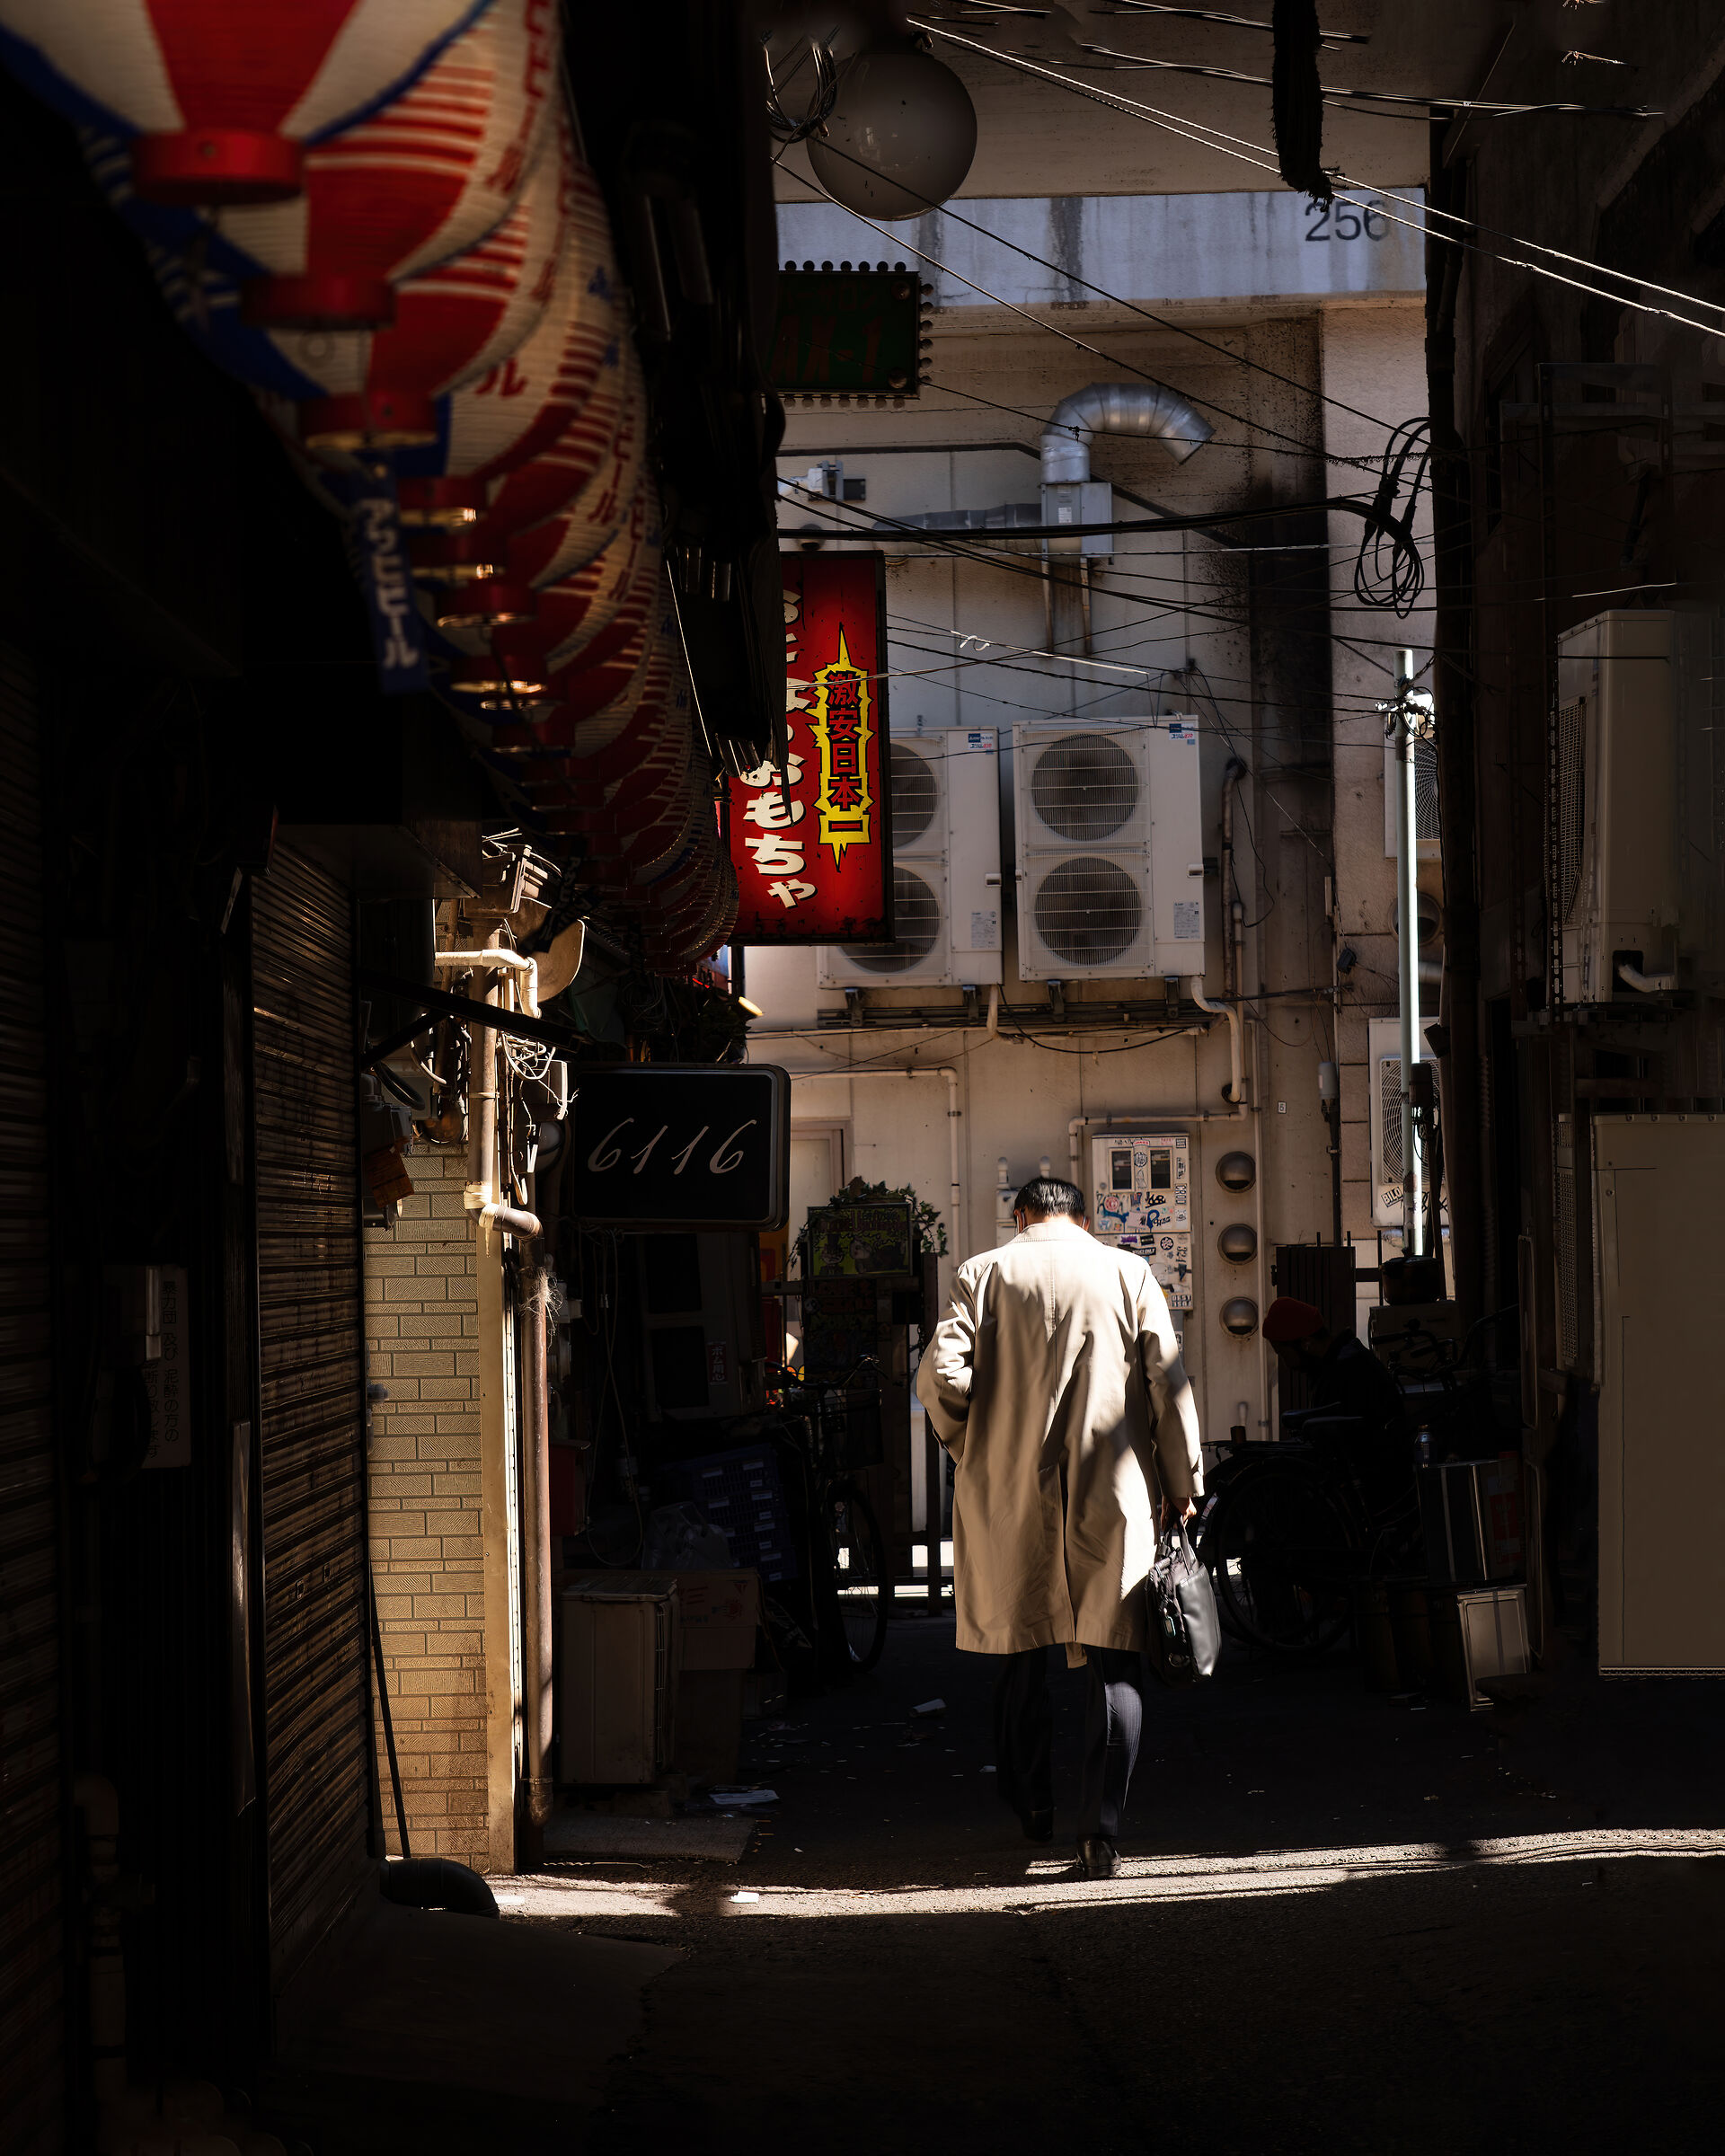 Games of light and shadow in the streets of Tokyo...